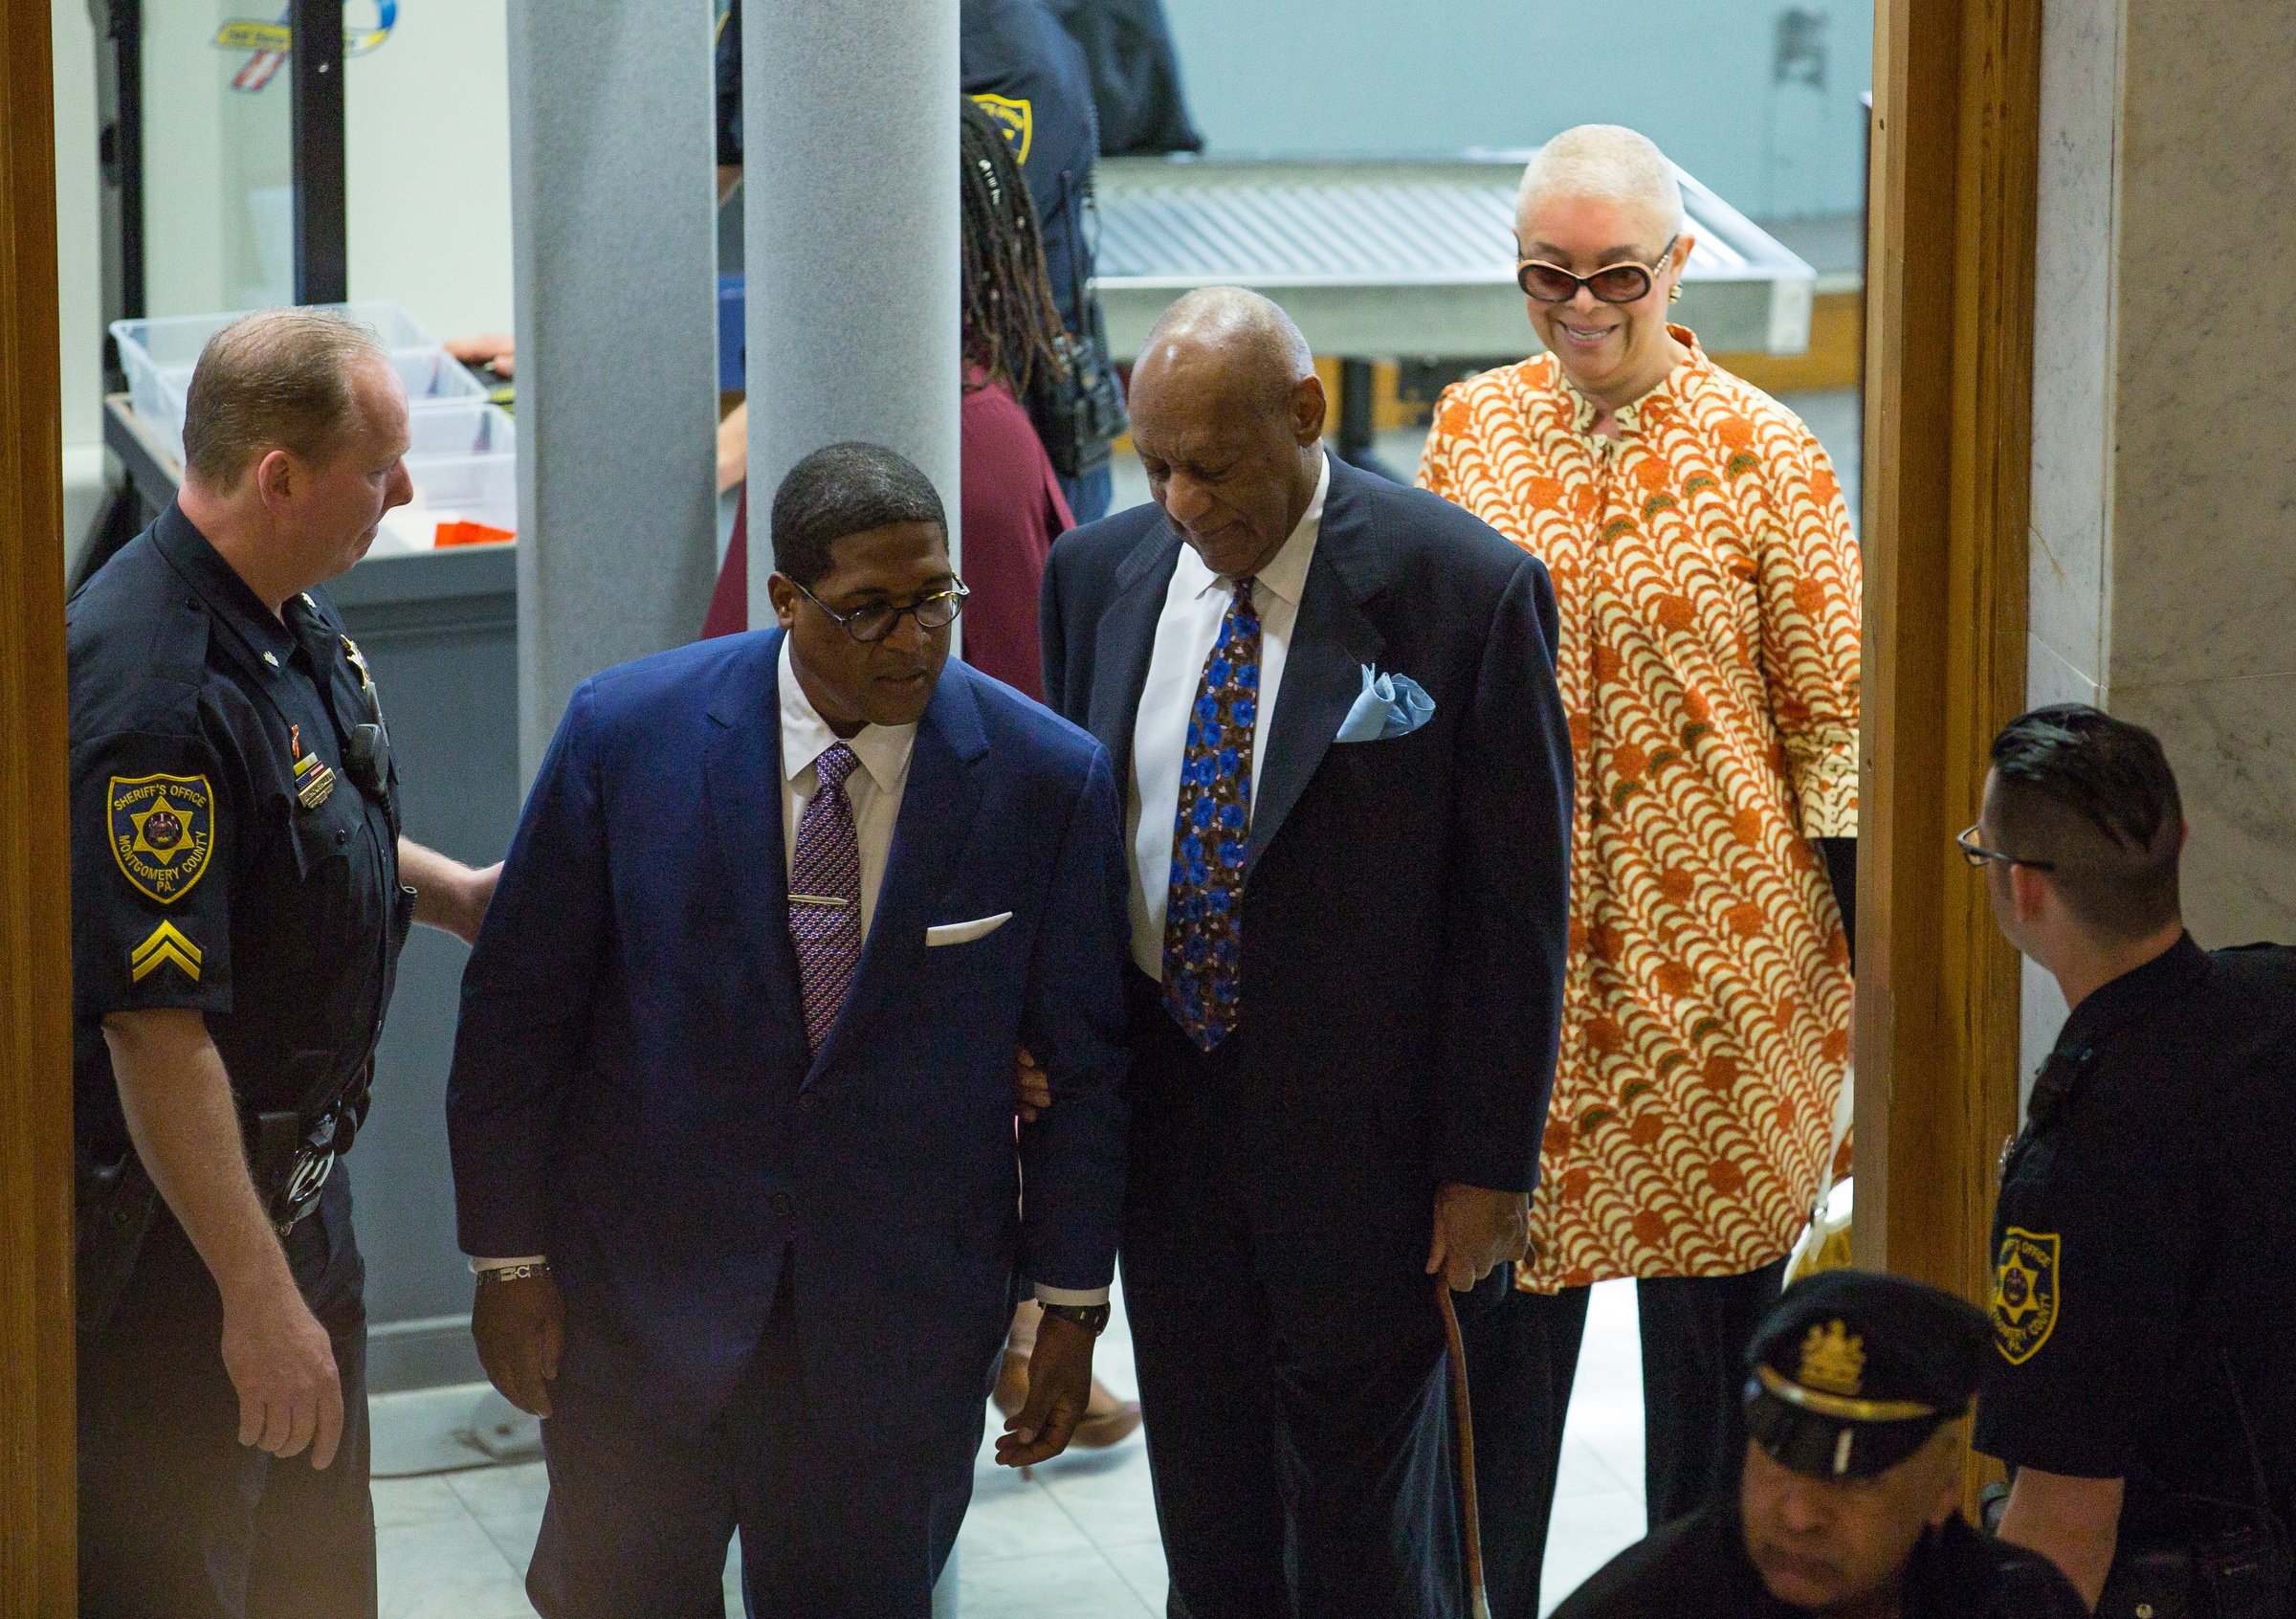 Camille Cosby with Bill Cosby and Andrew Wyatt at the Montgomery County Courthouse in Norristown, Pennsylvania | Photo: Getty Images